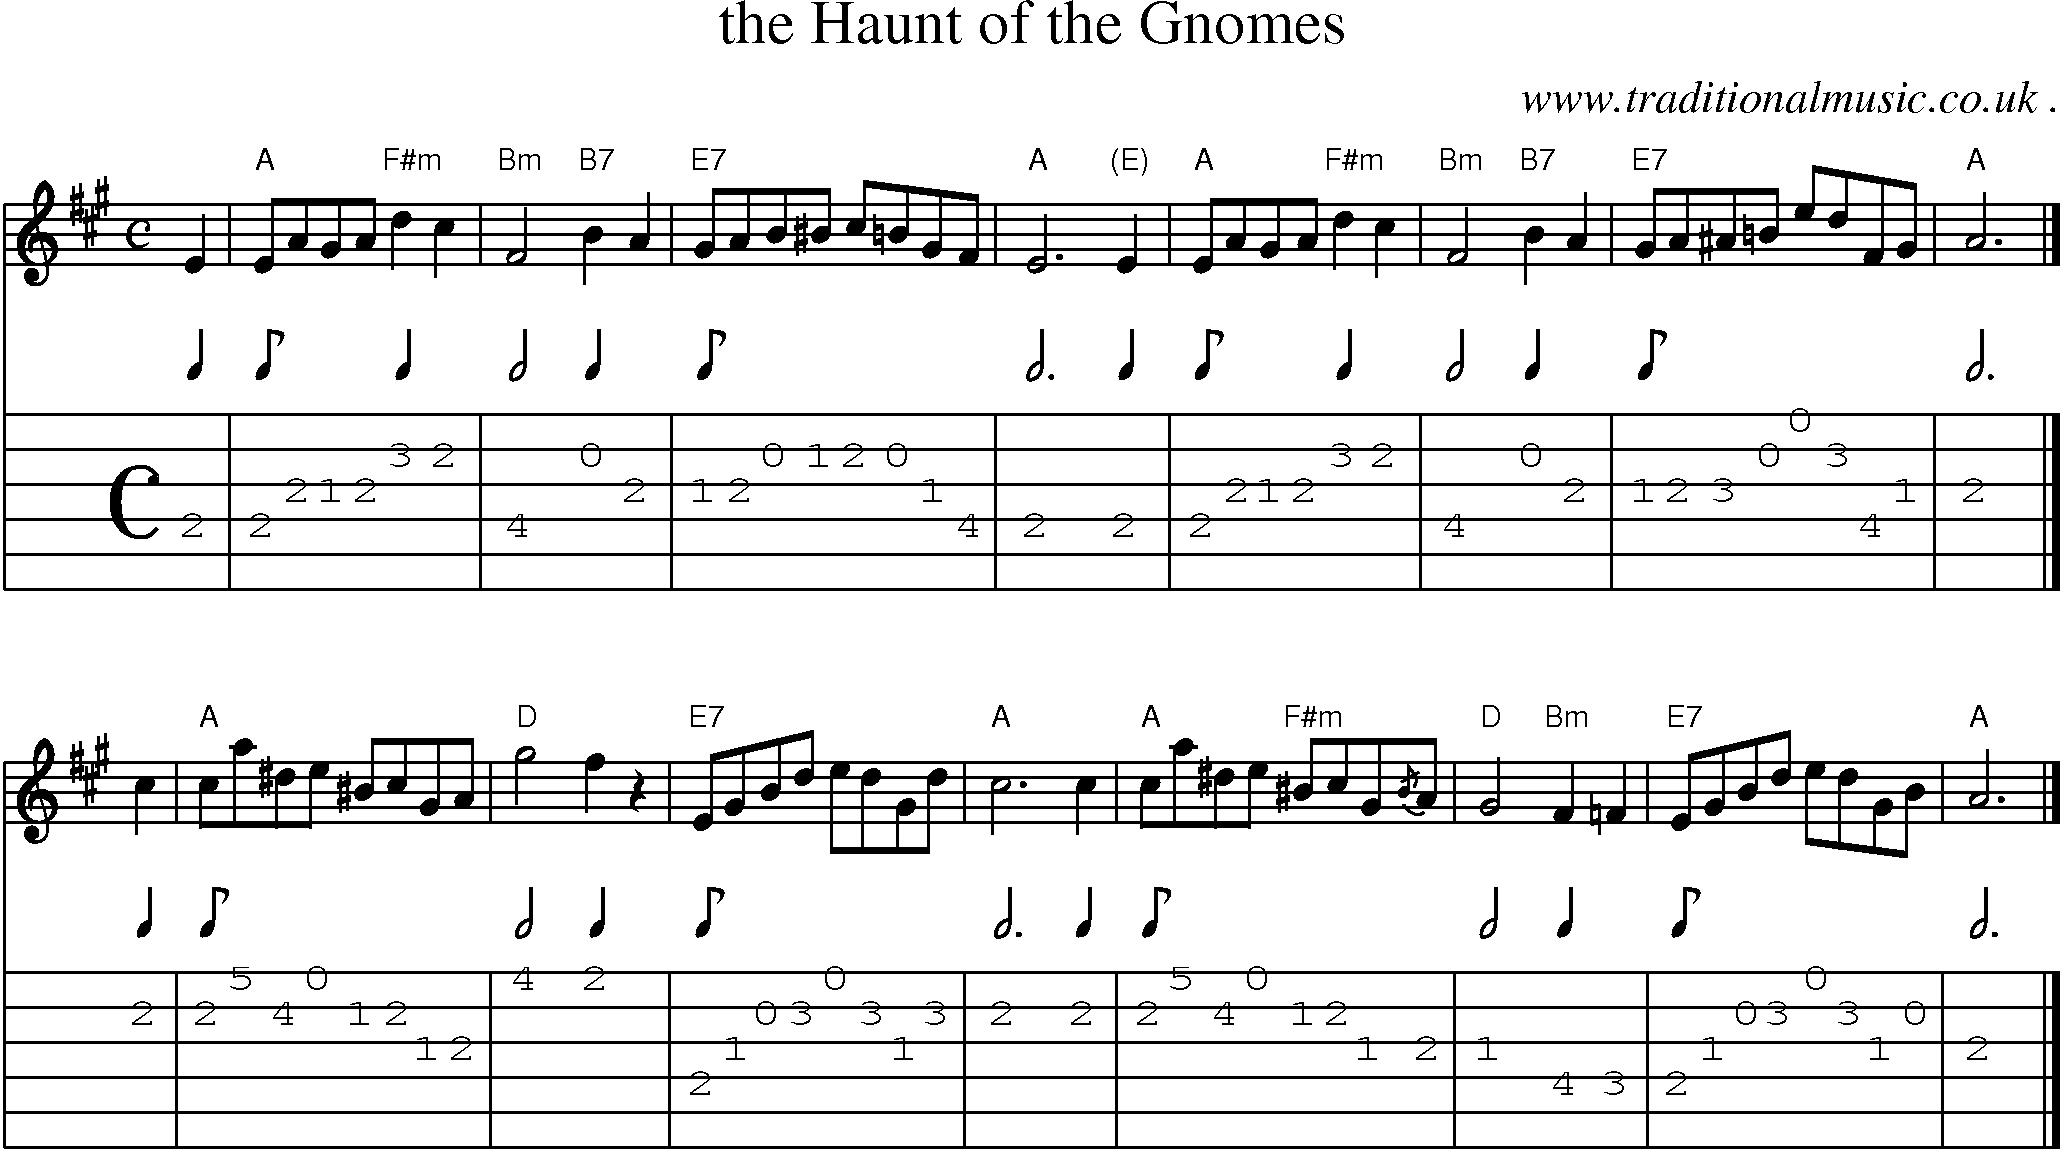 Sheet-music  score, Chords and Guitar Tabs for The Haunt Of The Gnomes